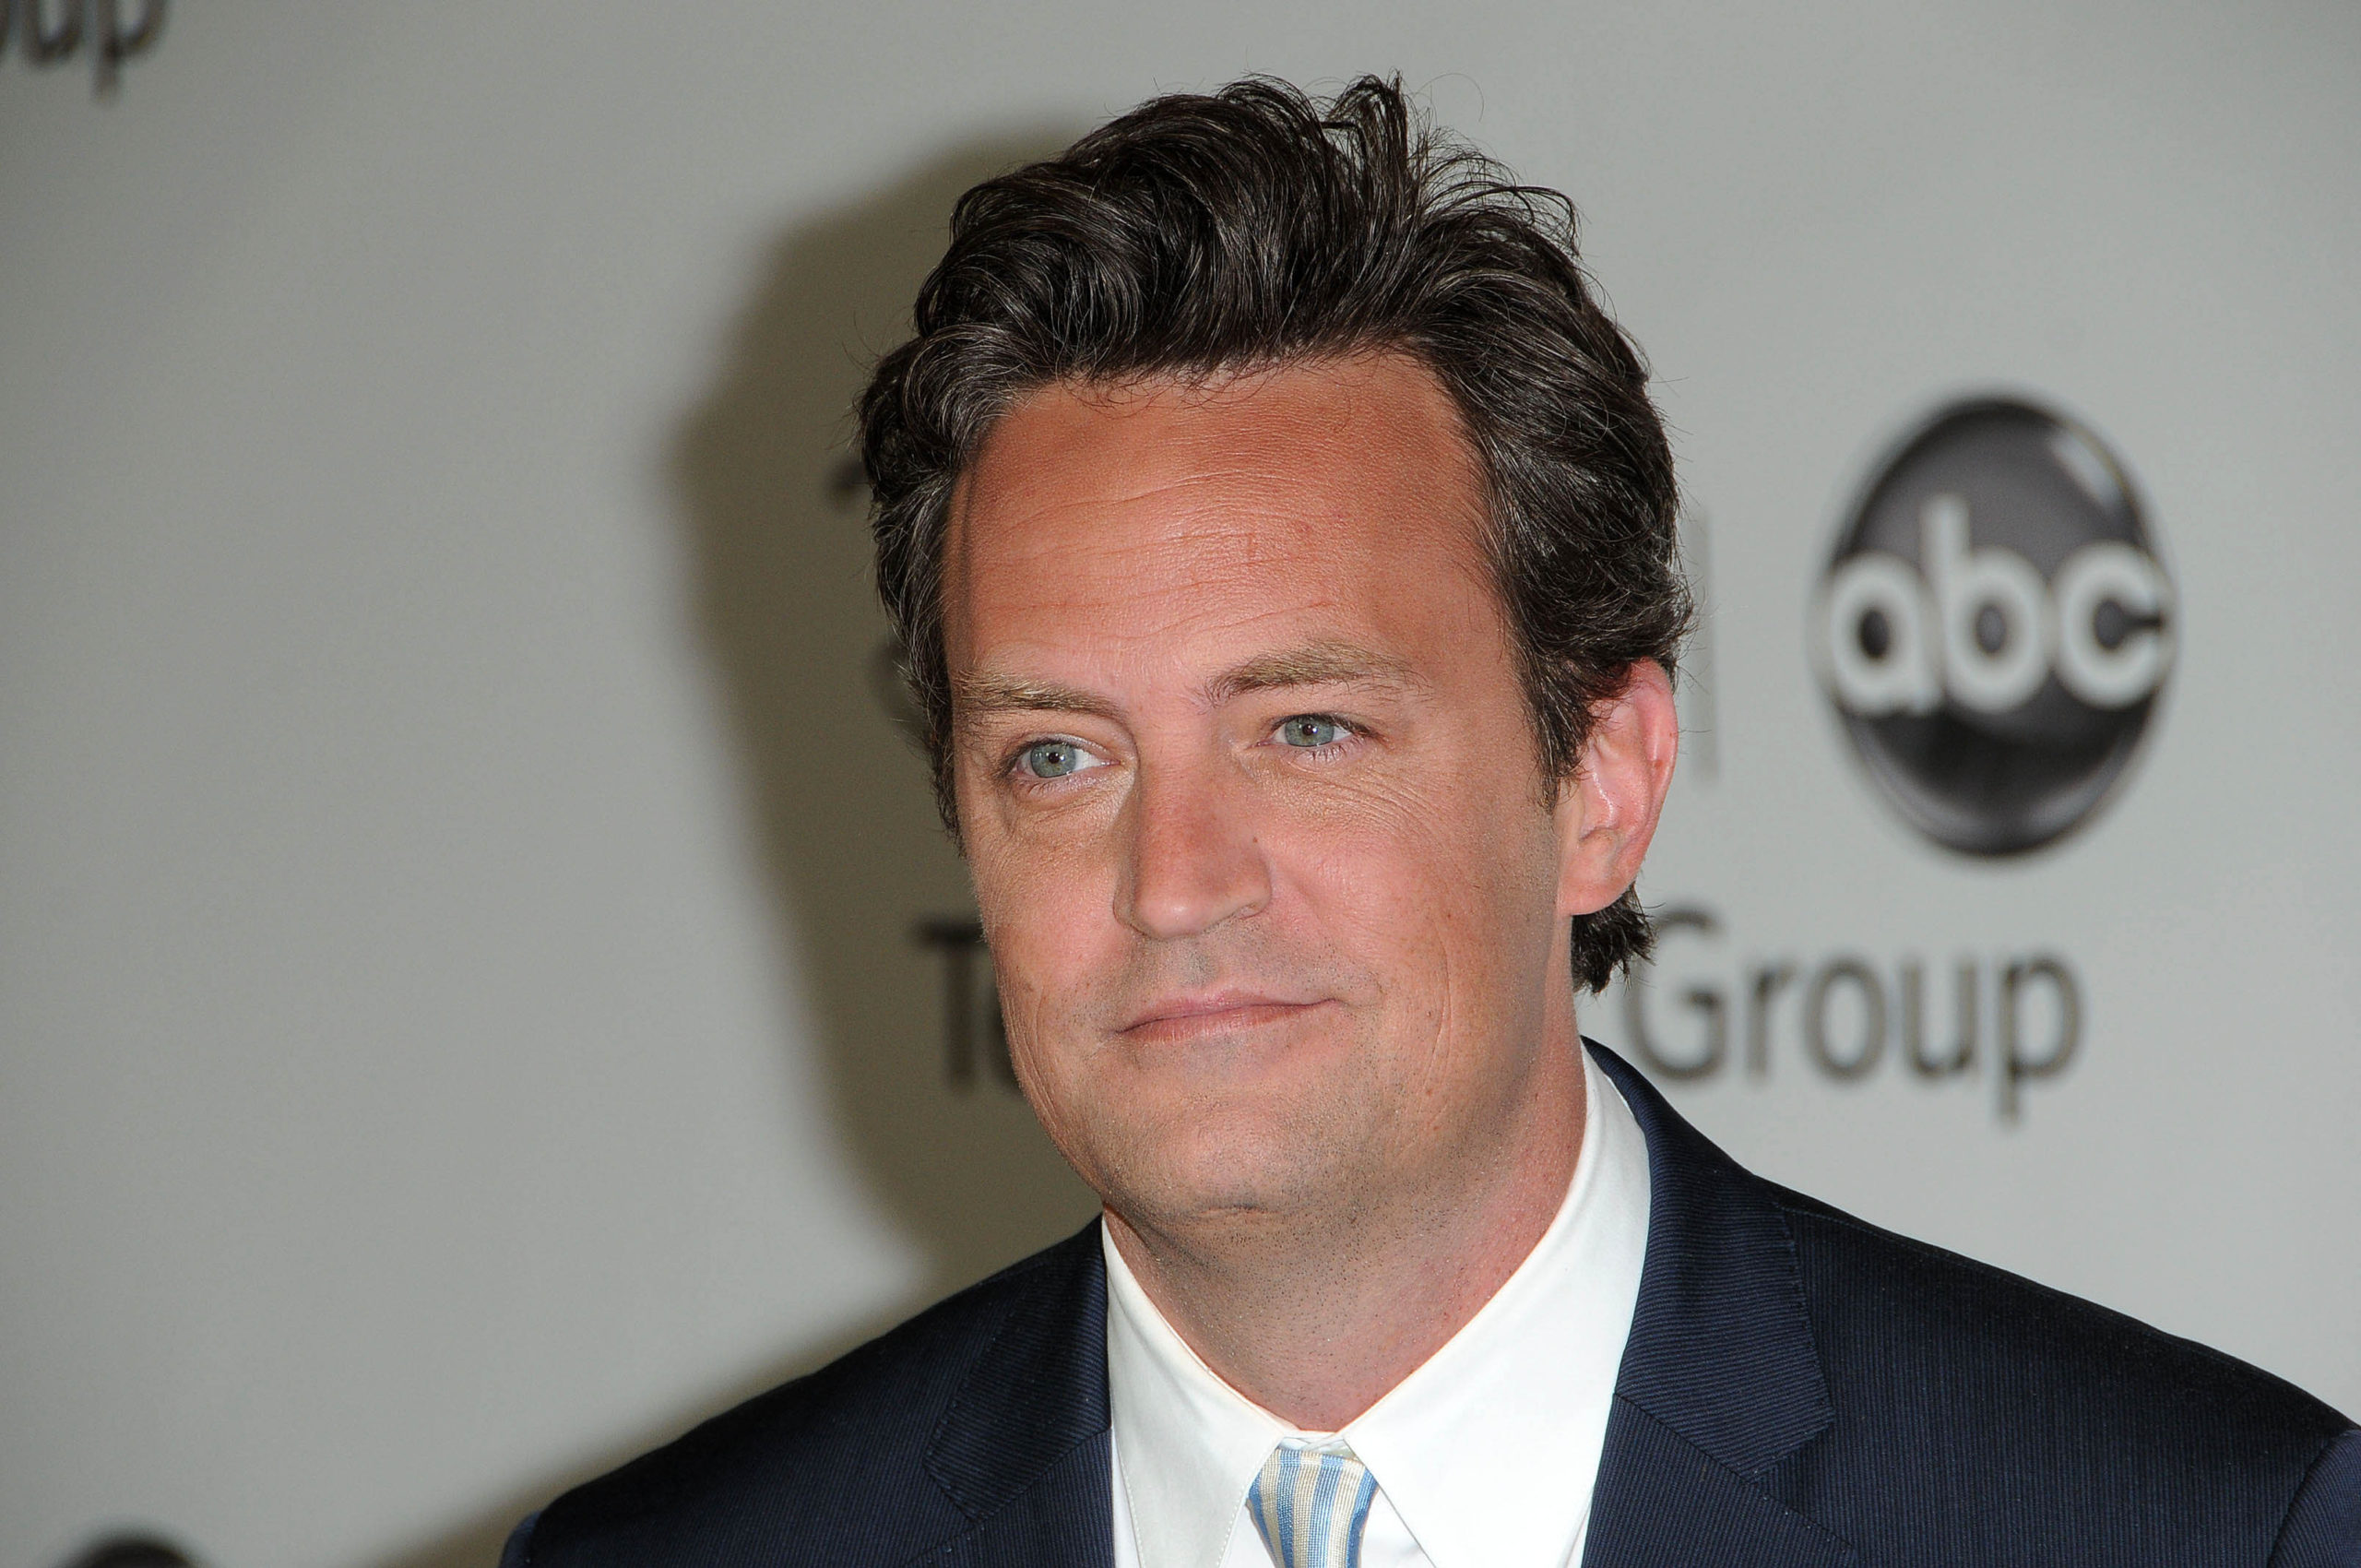 Before He Died, Matthew Perry Revealed How He Wished People Would Remember Him | Breaking reports are sharing that Friends star Matthew Perry has died.